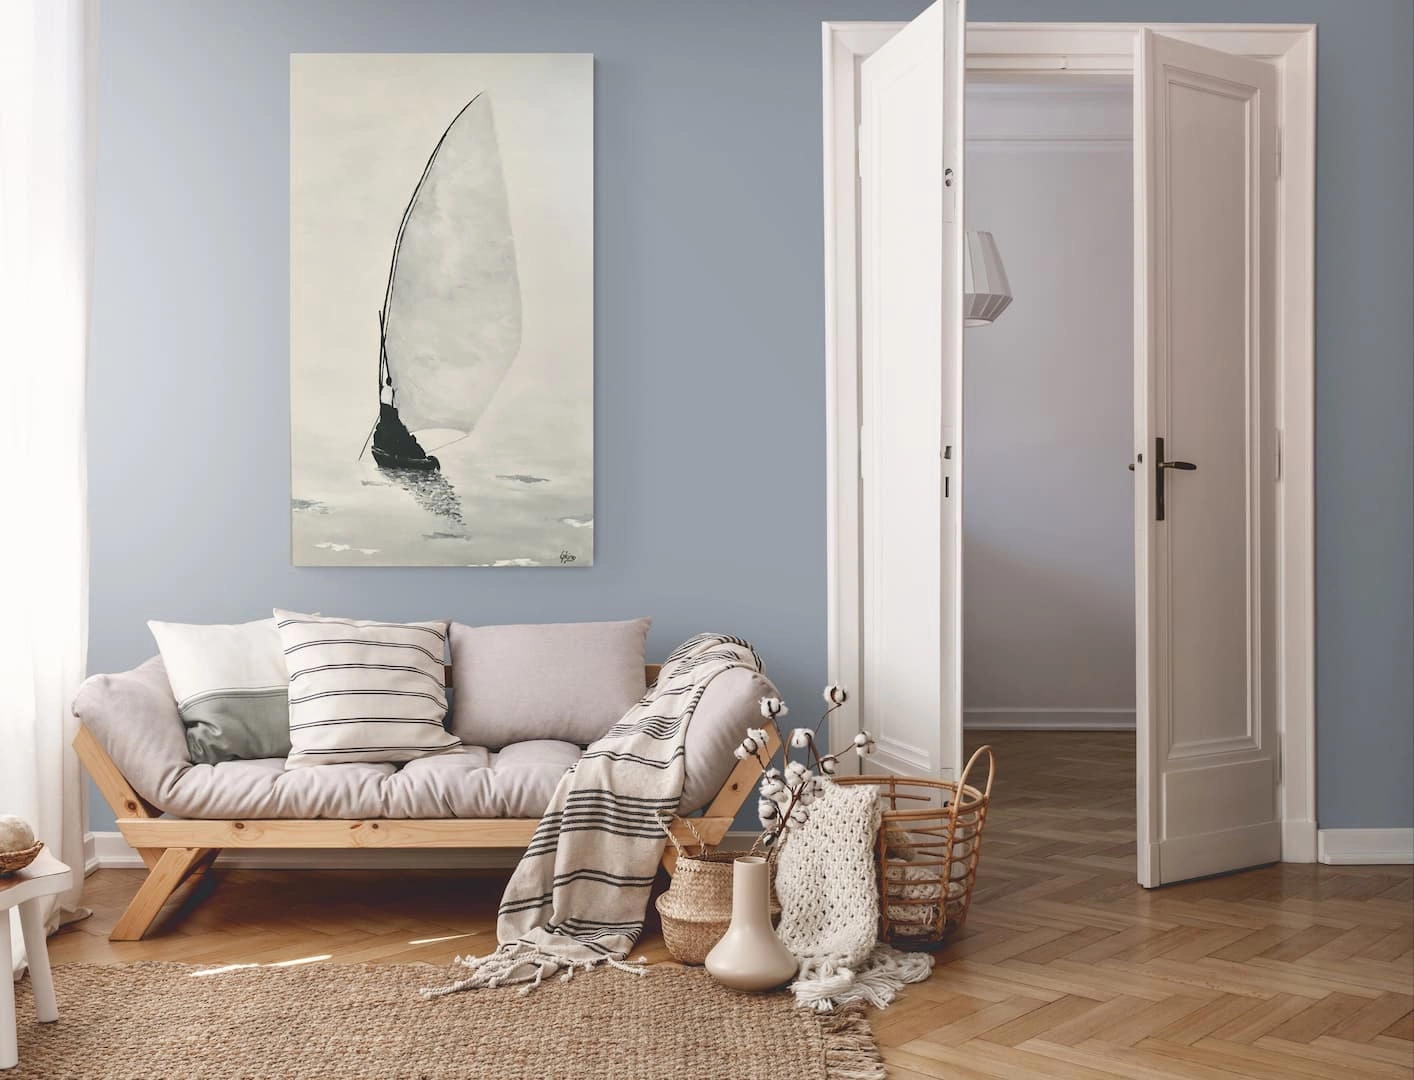 Living rooms in general are a great place to expose a sea painting